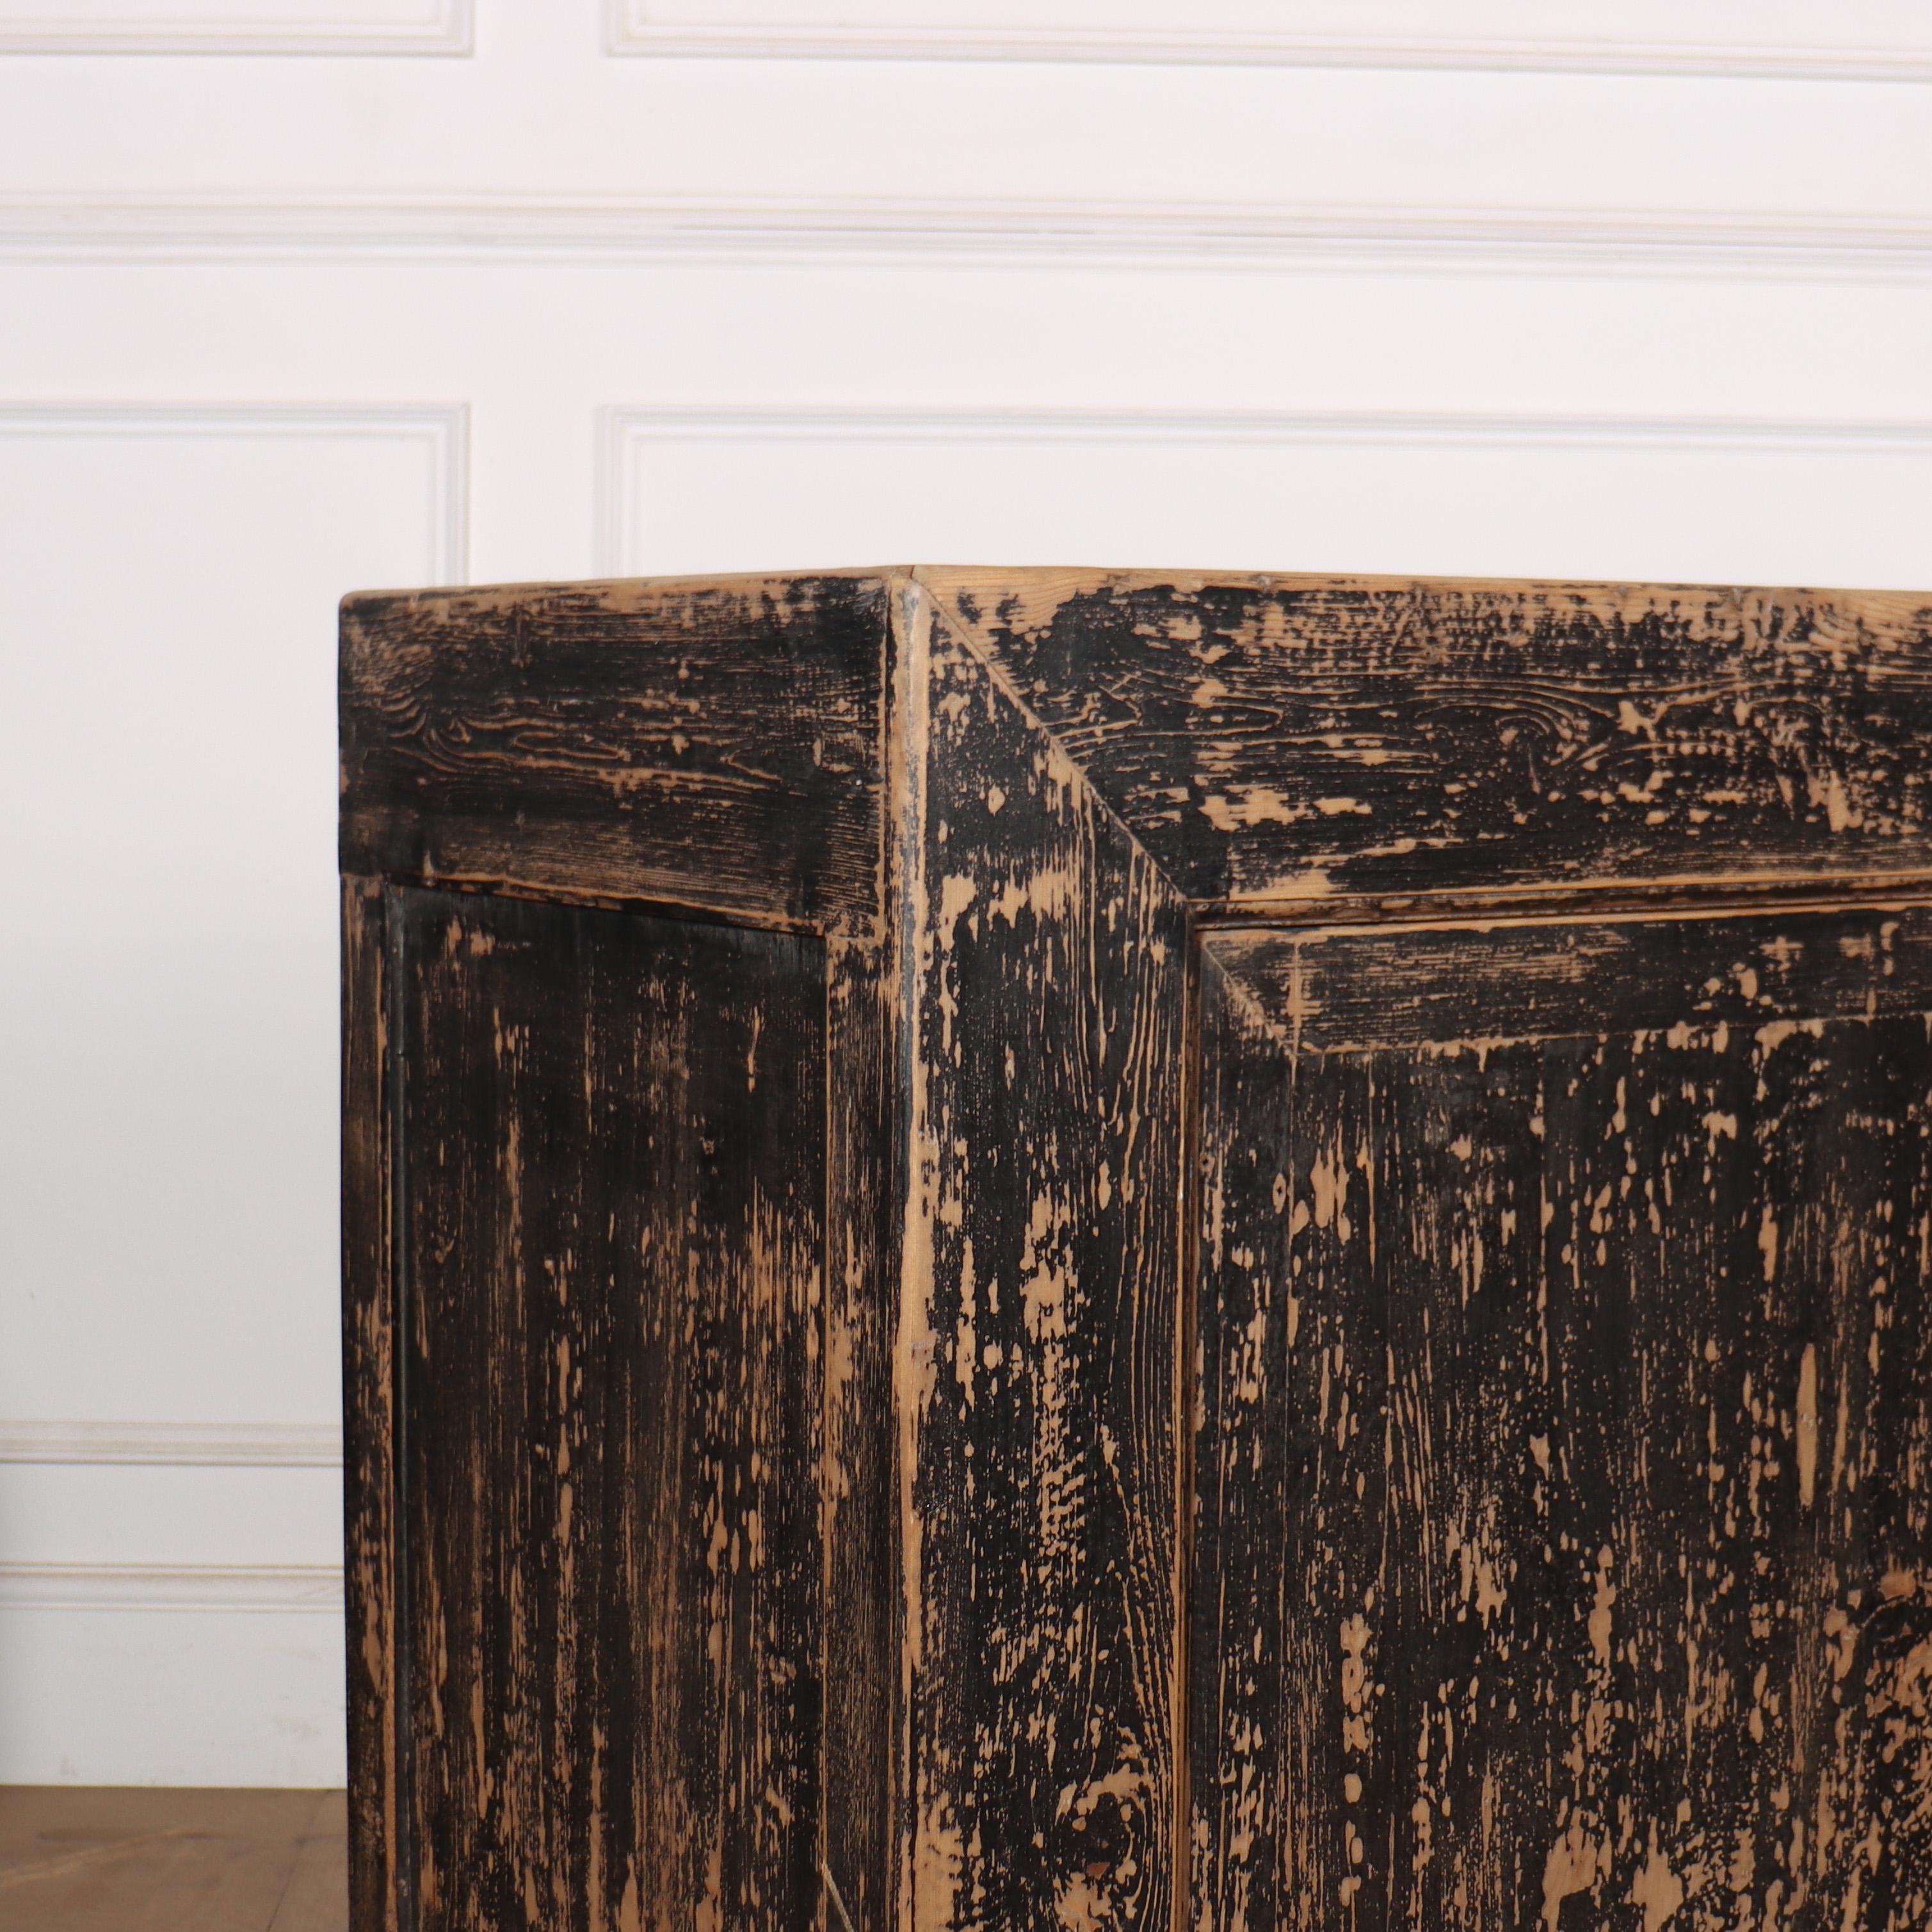 Large 4 door painted pine sideboard with a distressed black finish.

Reference: 8151

Dimensions
89 inches (226 cms) Wide
19 inches (48 cms) Deep
34.5 inches (88 cms) High